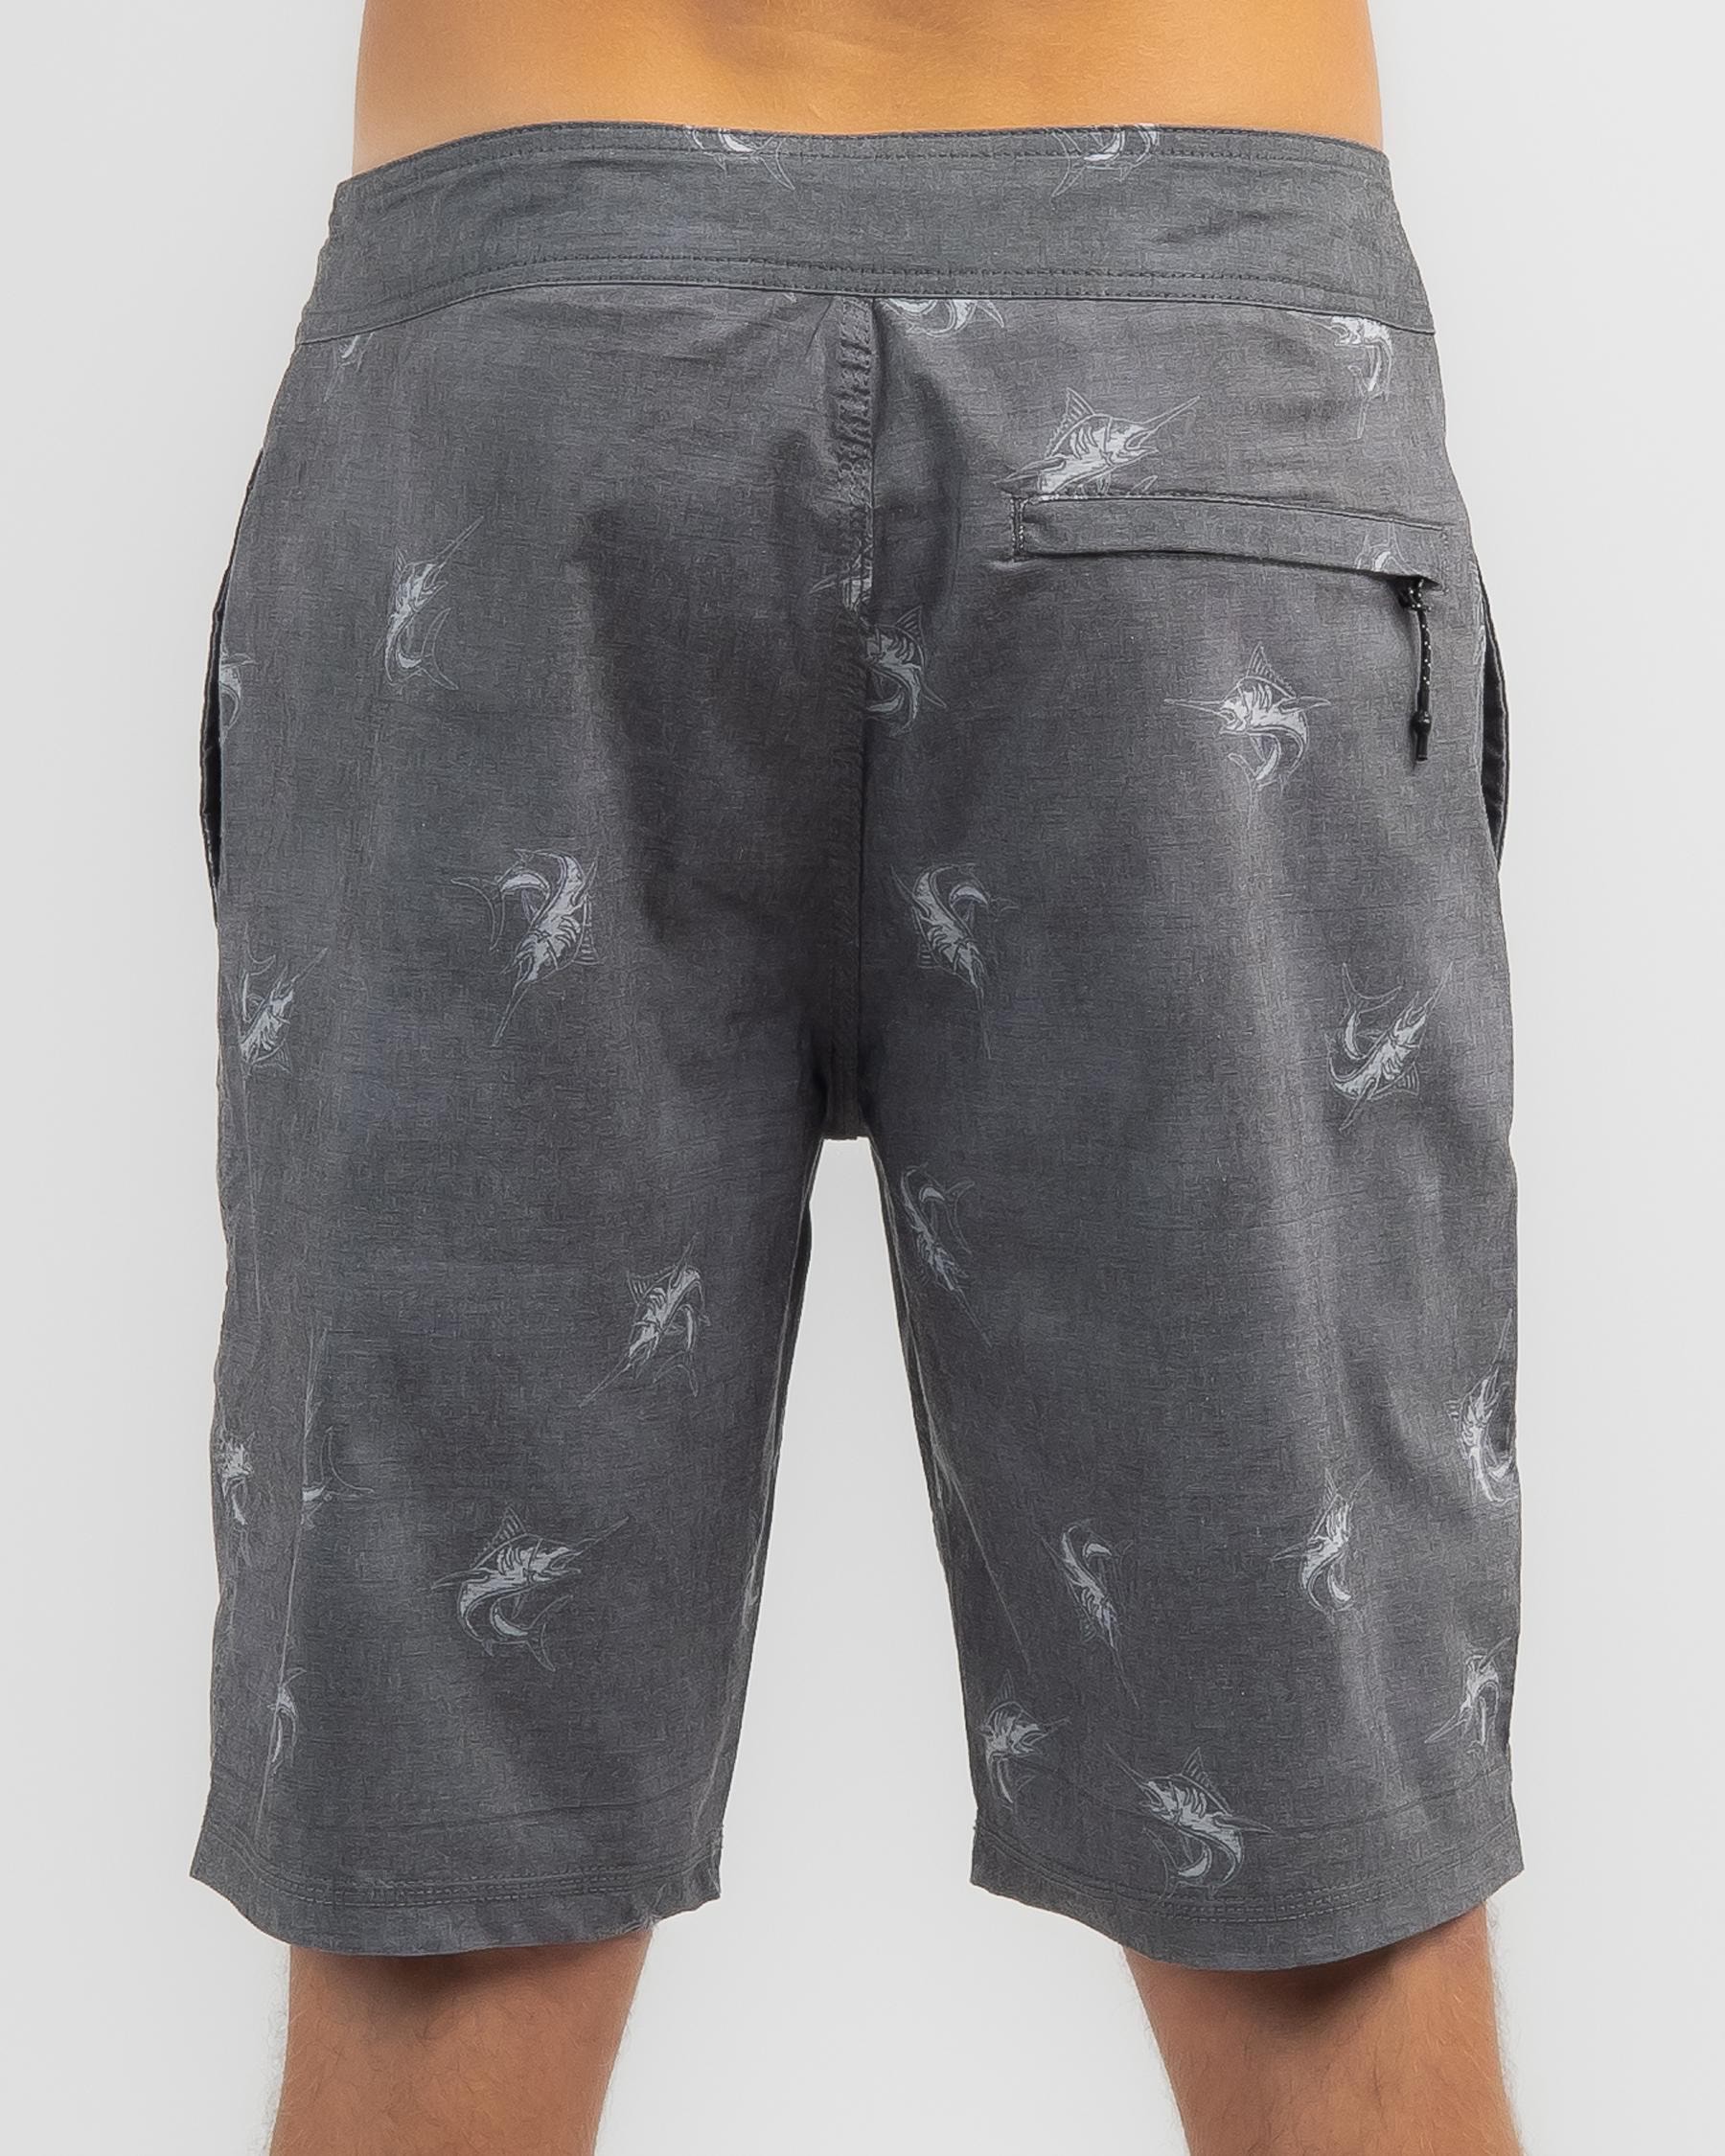 Salty Life Escapism Board Shorts In Grey/black - Fast Shipping & Easy ...